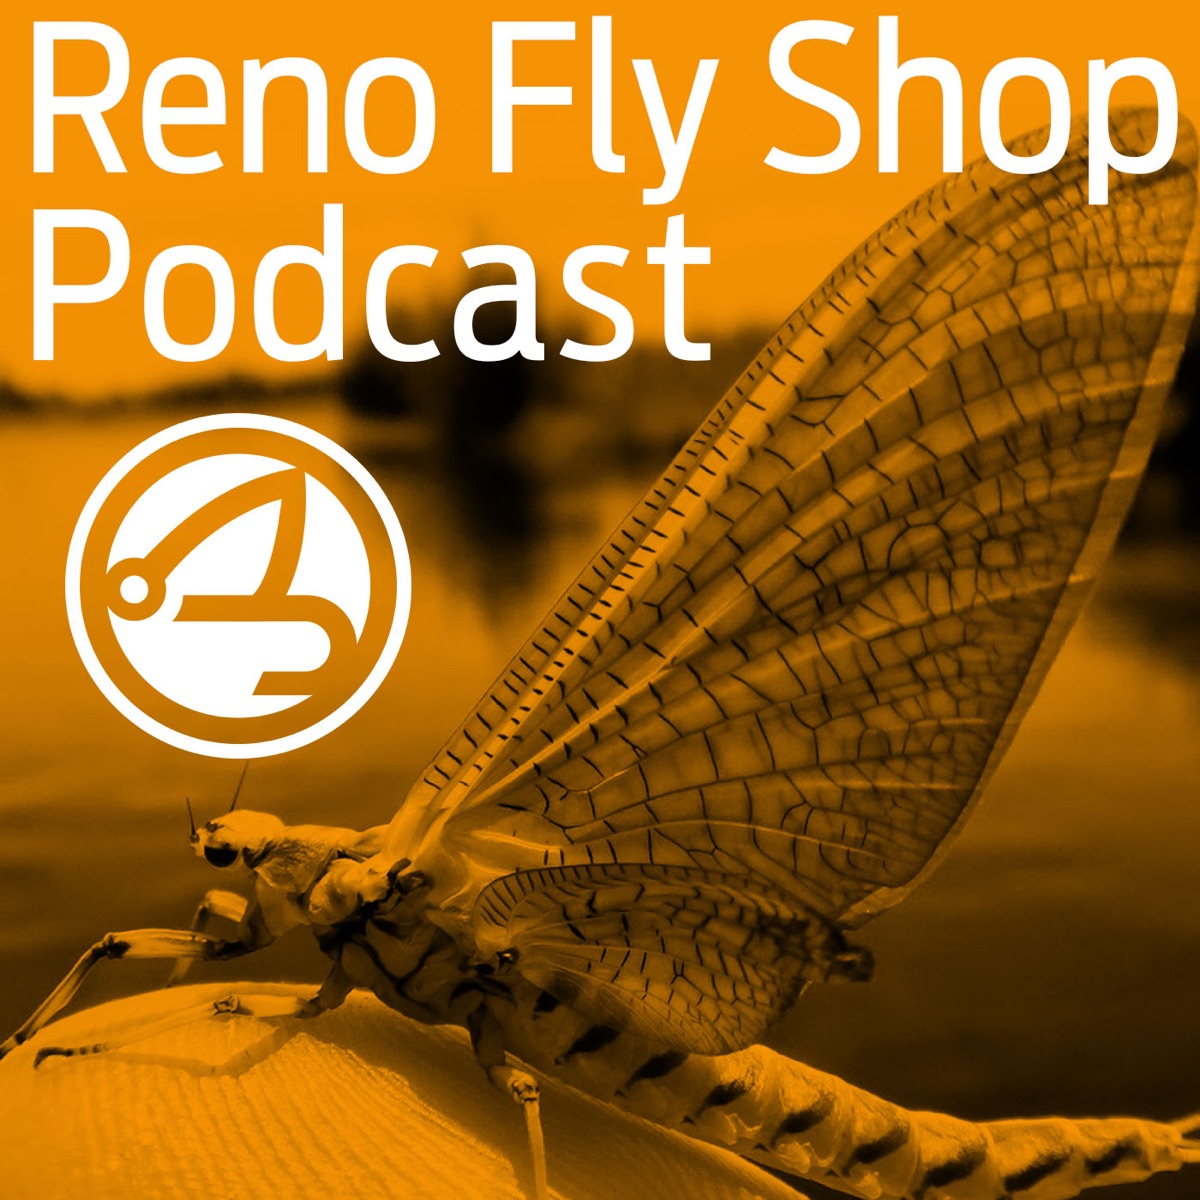 Reno Fly Shop Podcast - A Fly Fishing Podcast with Special Guests